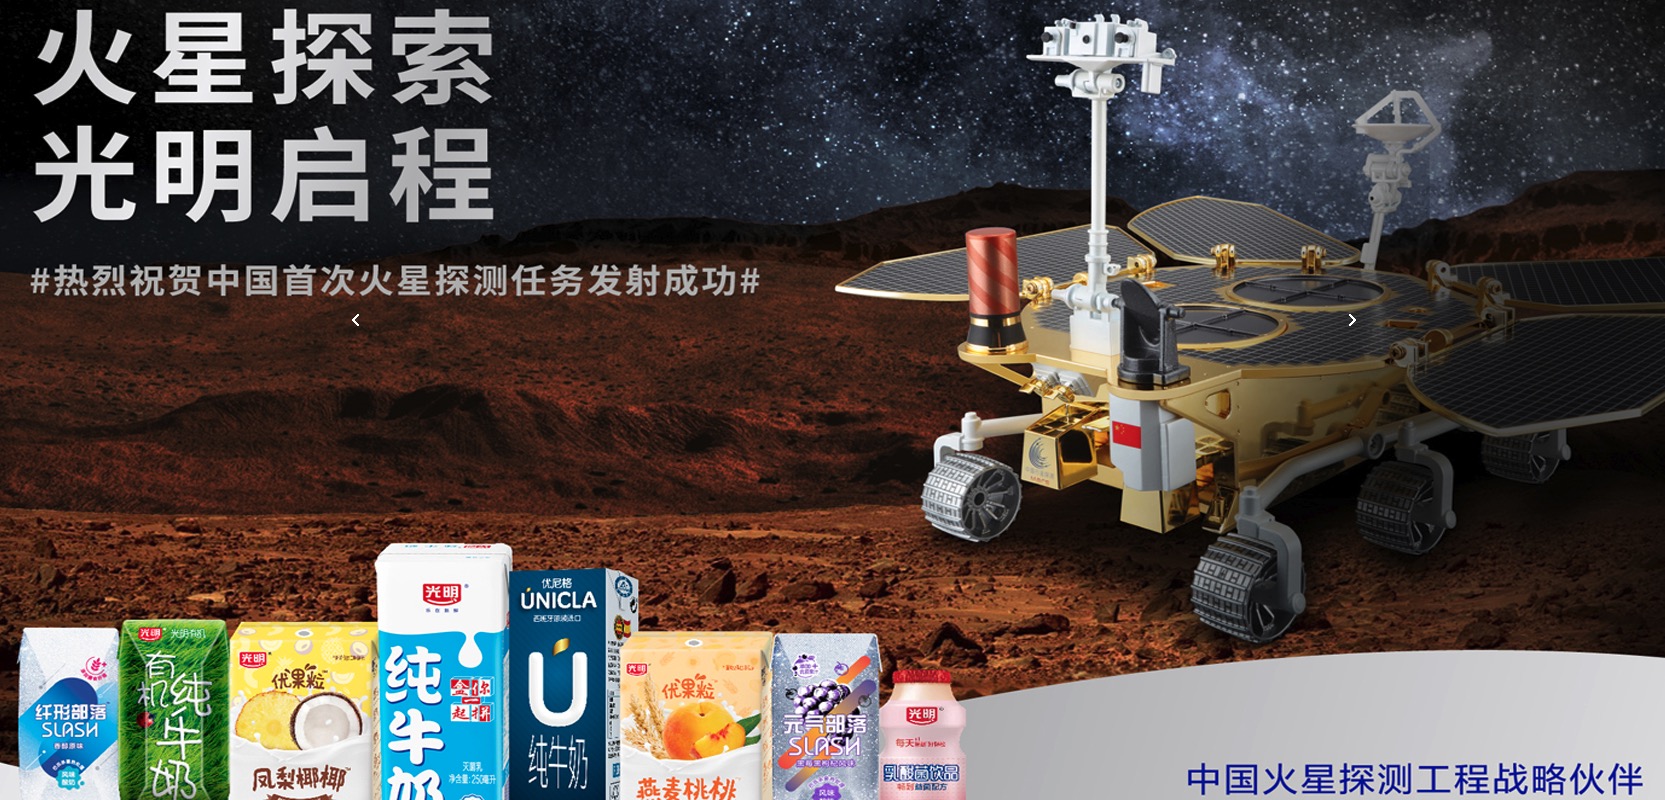 Bright Dairy launches joint products for Mars exploration in China